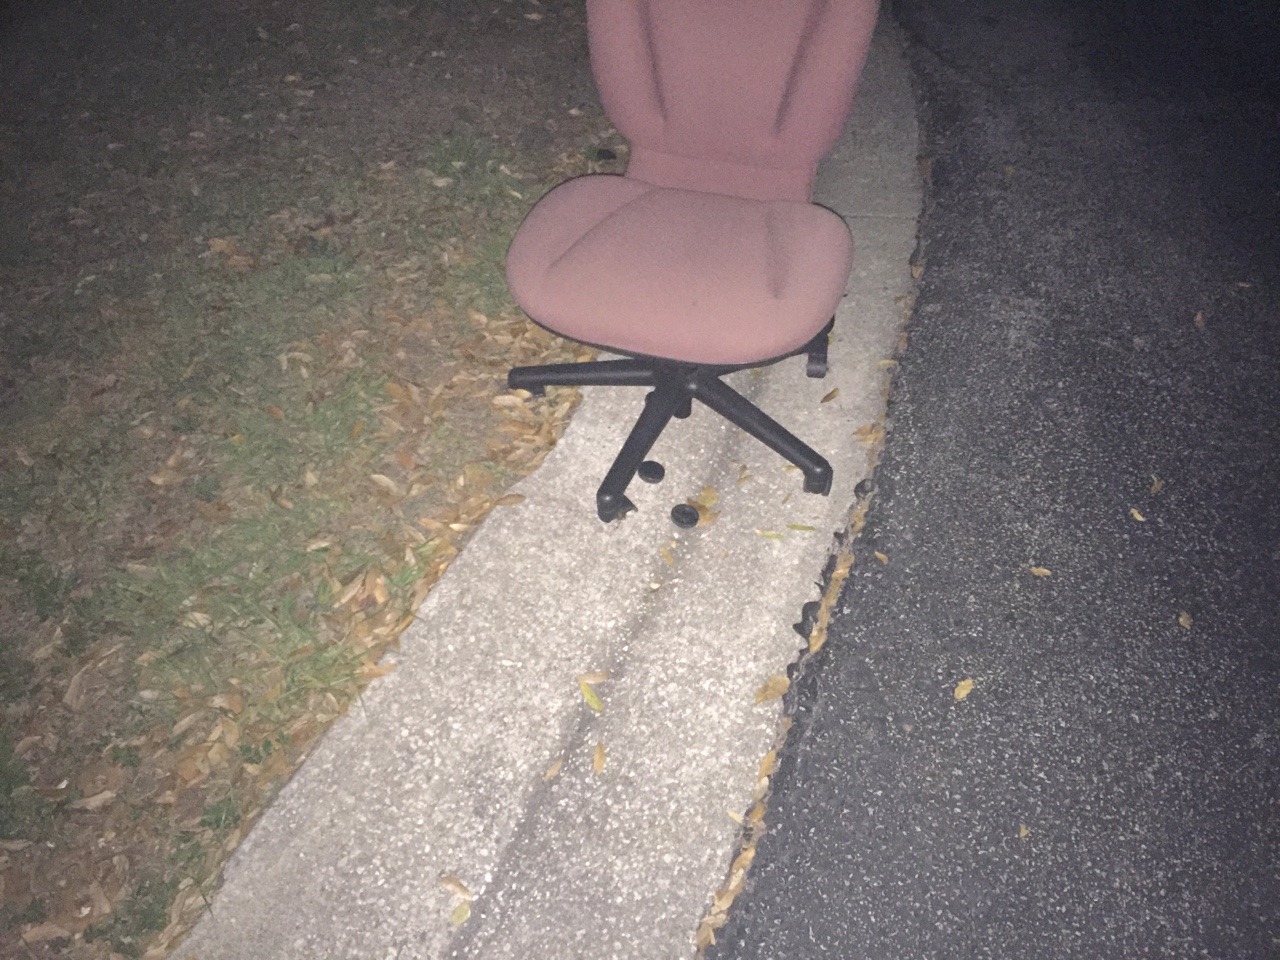 Photo of a broken office chair on the side of the road at night